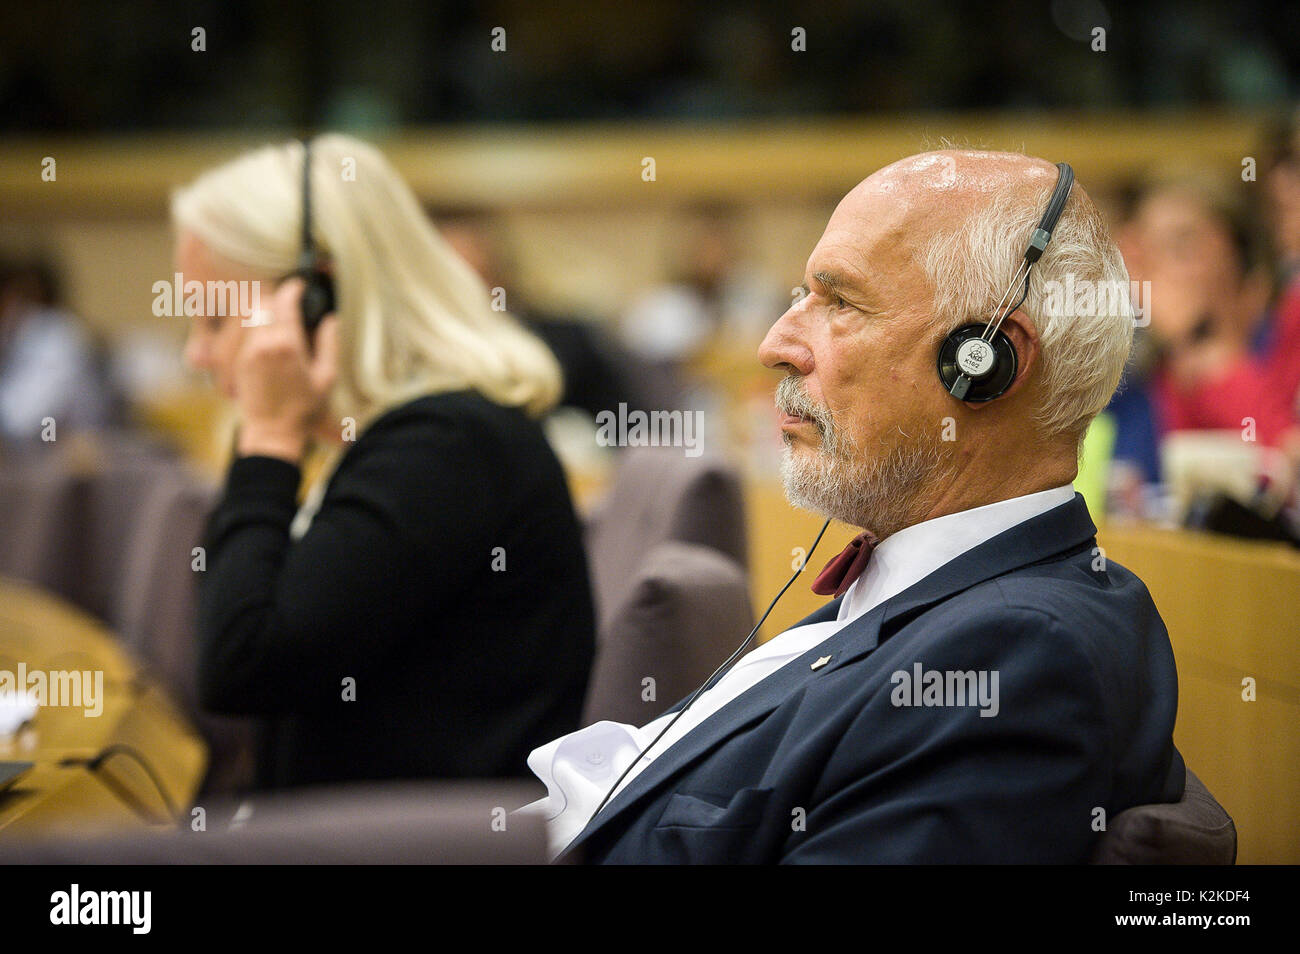 Janusz Korwin Mikke Member of European Parliament (MEP) during debate on Rule of law in Poland at European Parliament's Committee of Civil Liberties, Justice and Home Affairs in Brussels, Belgium on 31.08.2017 by Wiktor Dabkowski | usage worldwide Stock Photo